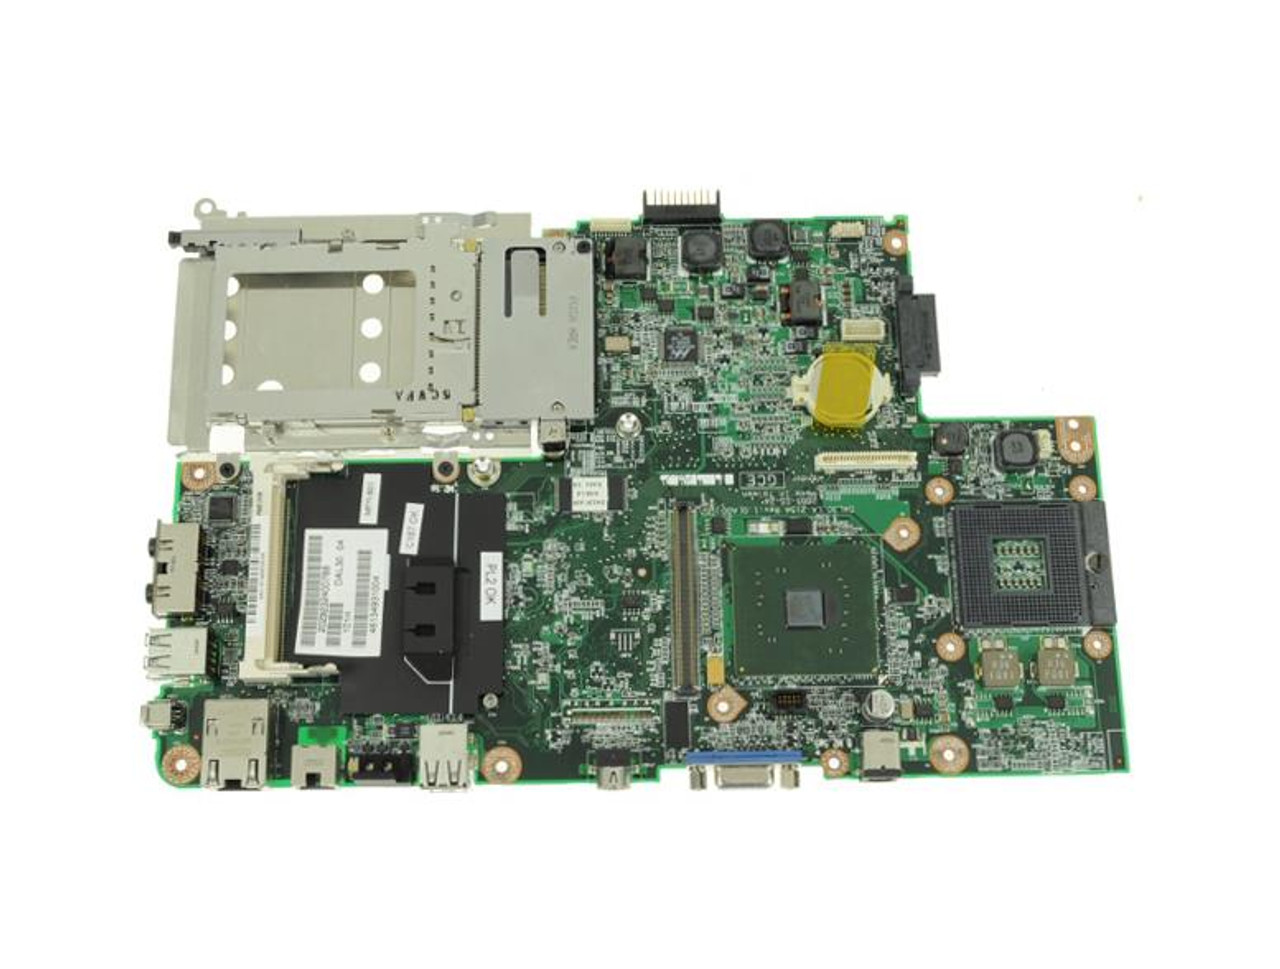 F6402-1 Dell System Board (Motherboard) For Inspiron 6000 (Refurbished)